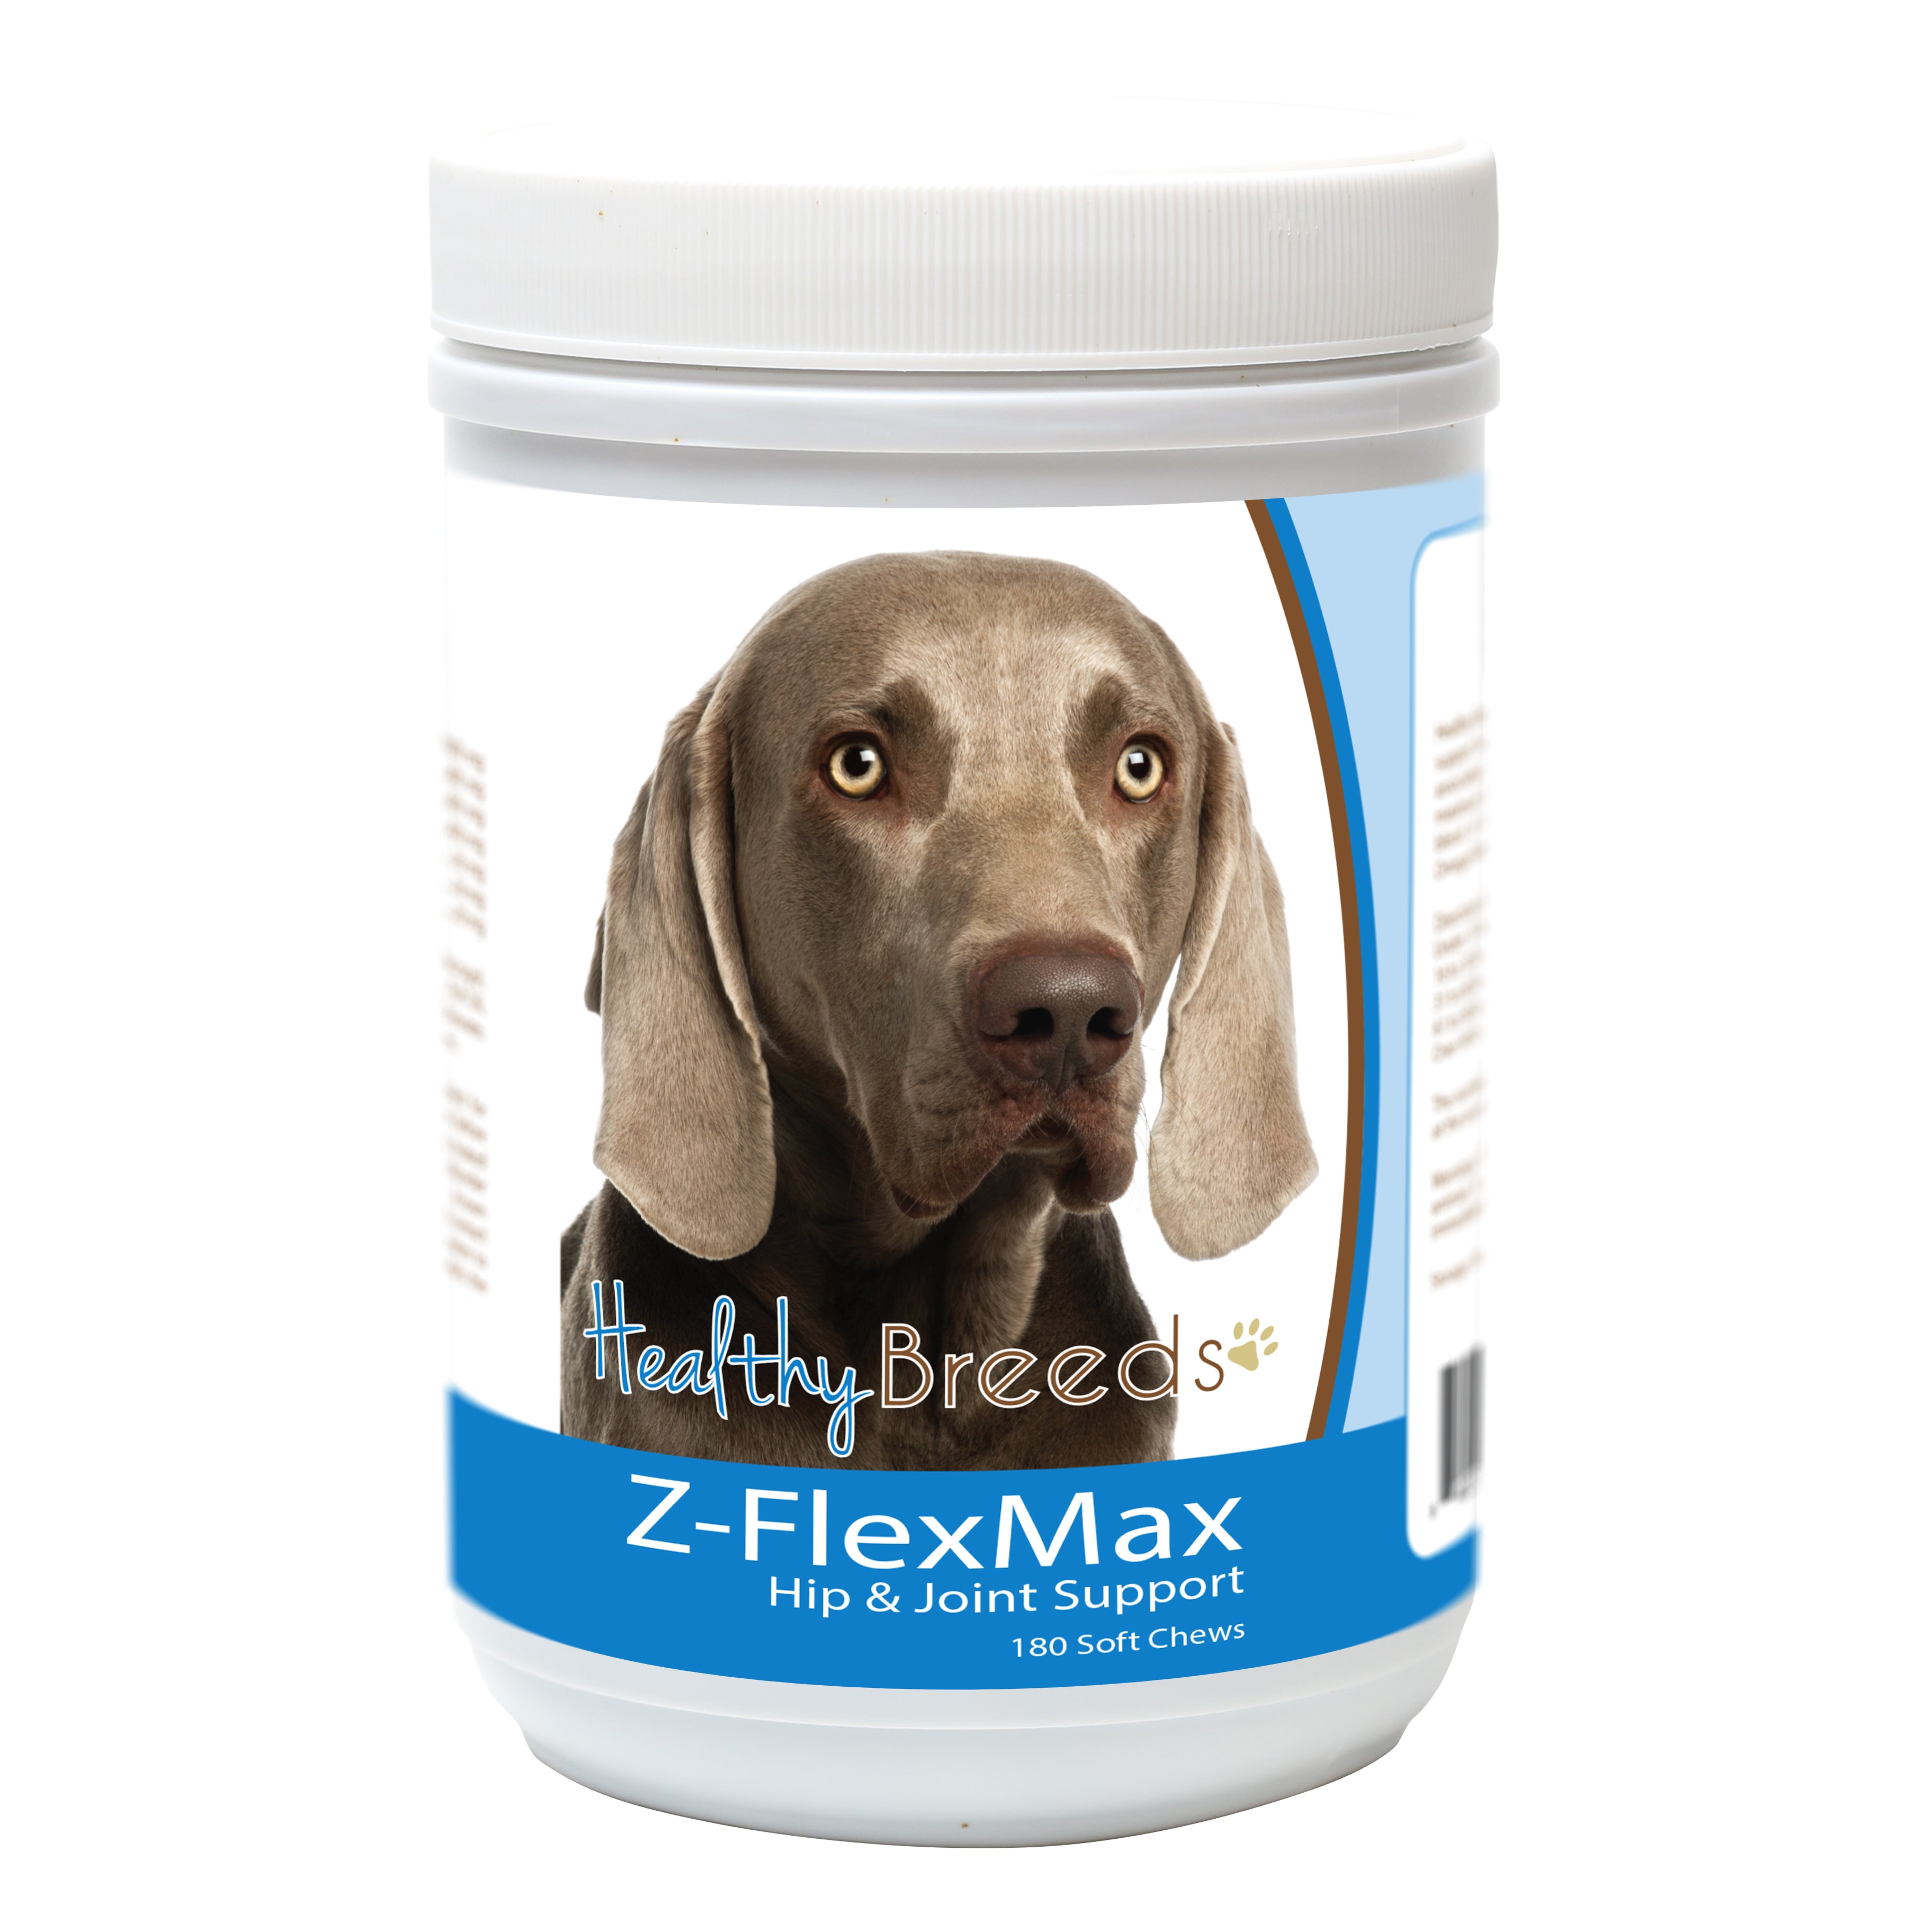 Weimaraner Z-Flex Max Dog Hip and Joint Support 180 Count